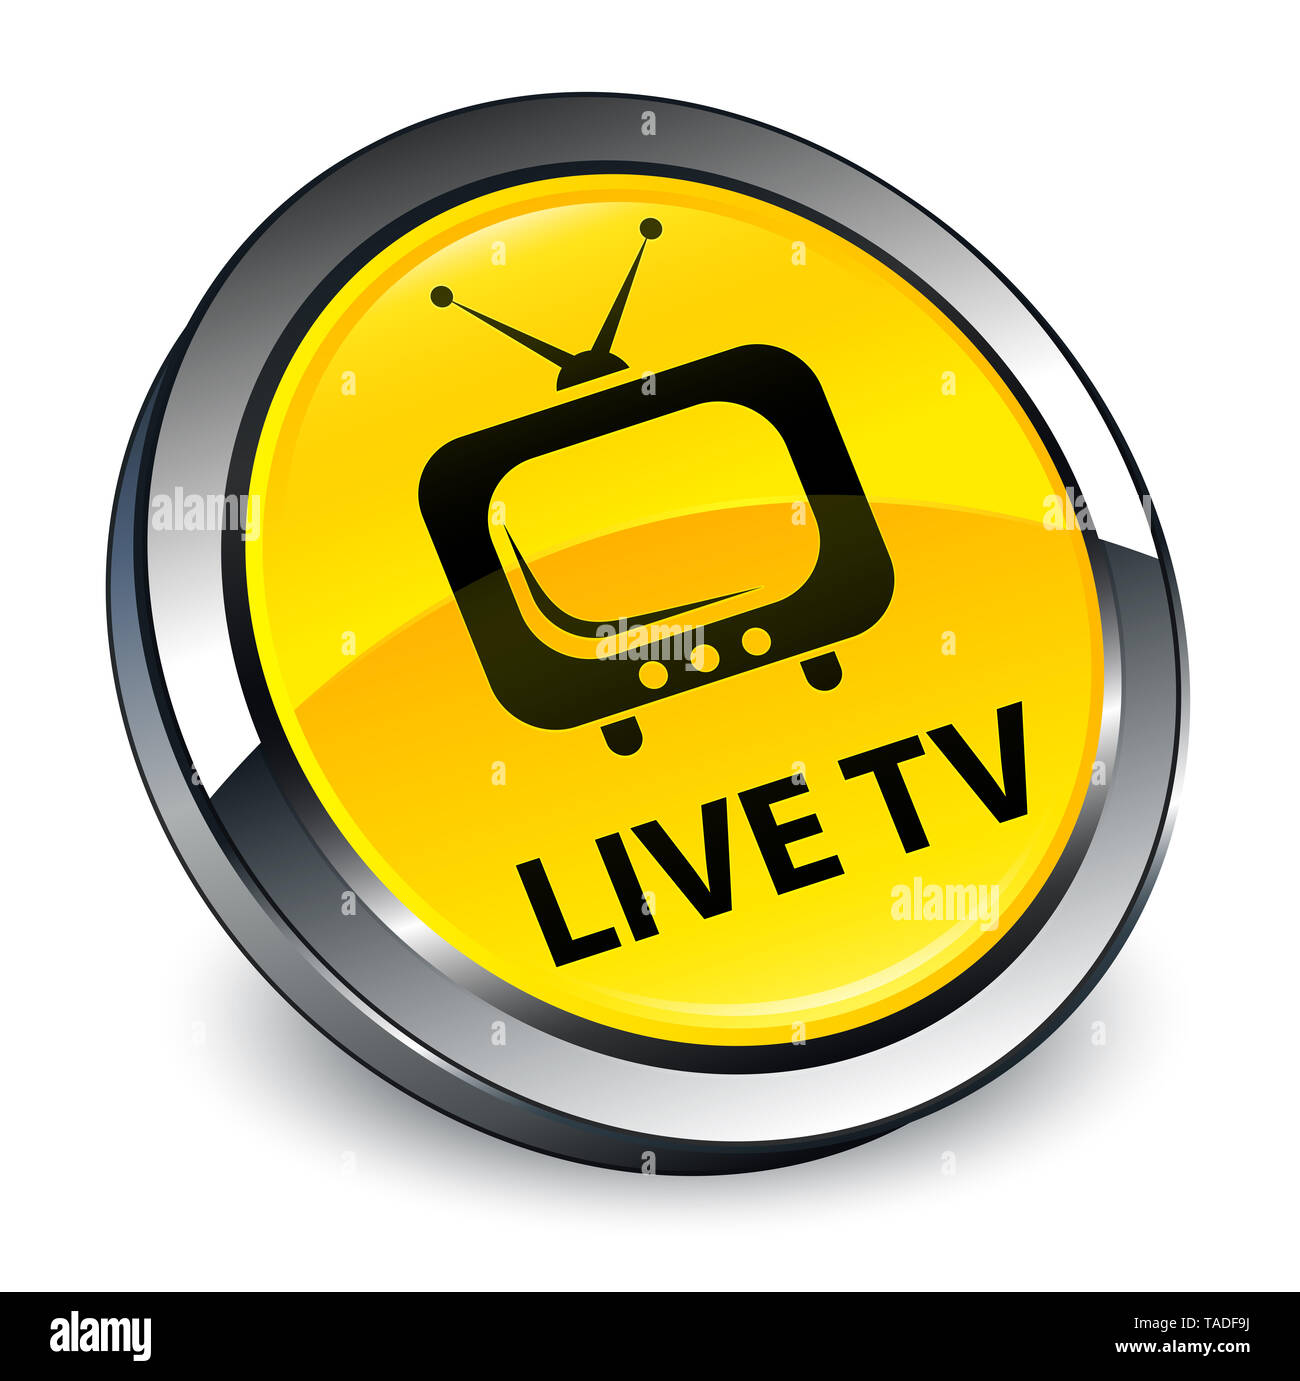 Live tv isolated on 3d yellow round button abstract illustration Stock Photo